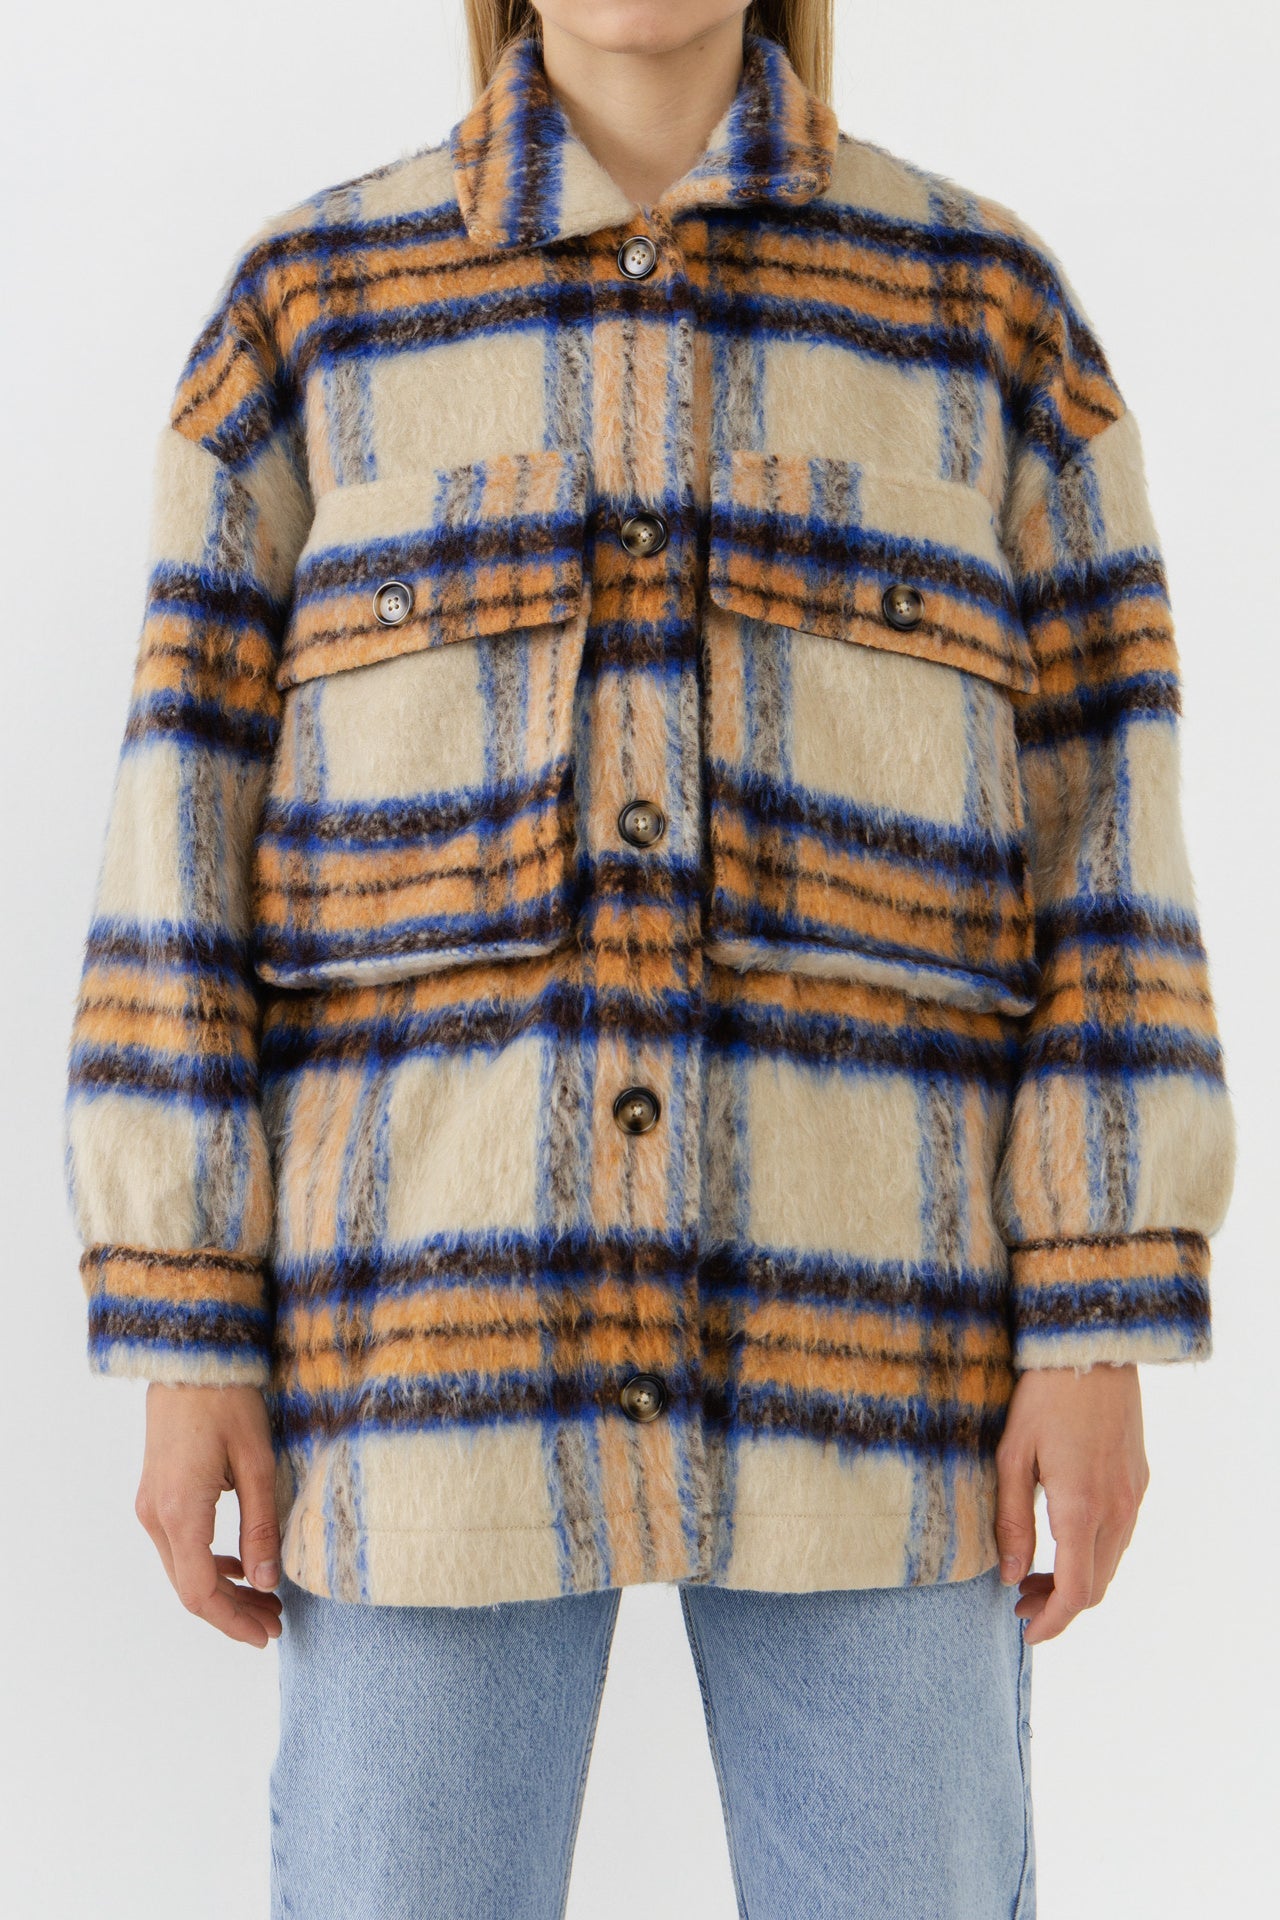 GREY LAB-Oversized Plaid Shacket with Pockets-COATS available at Objectrare